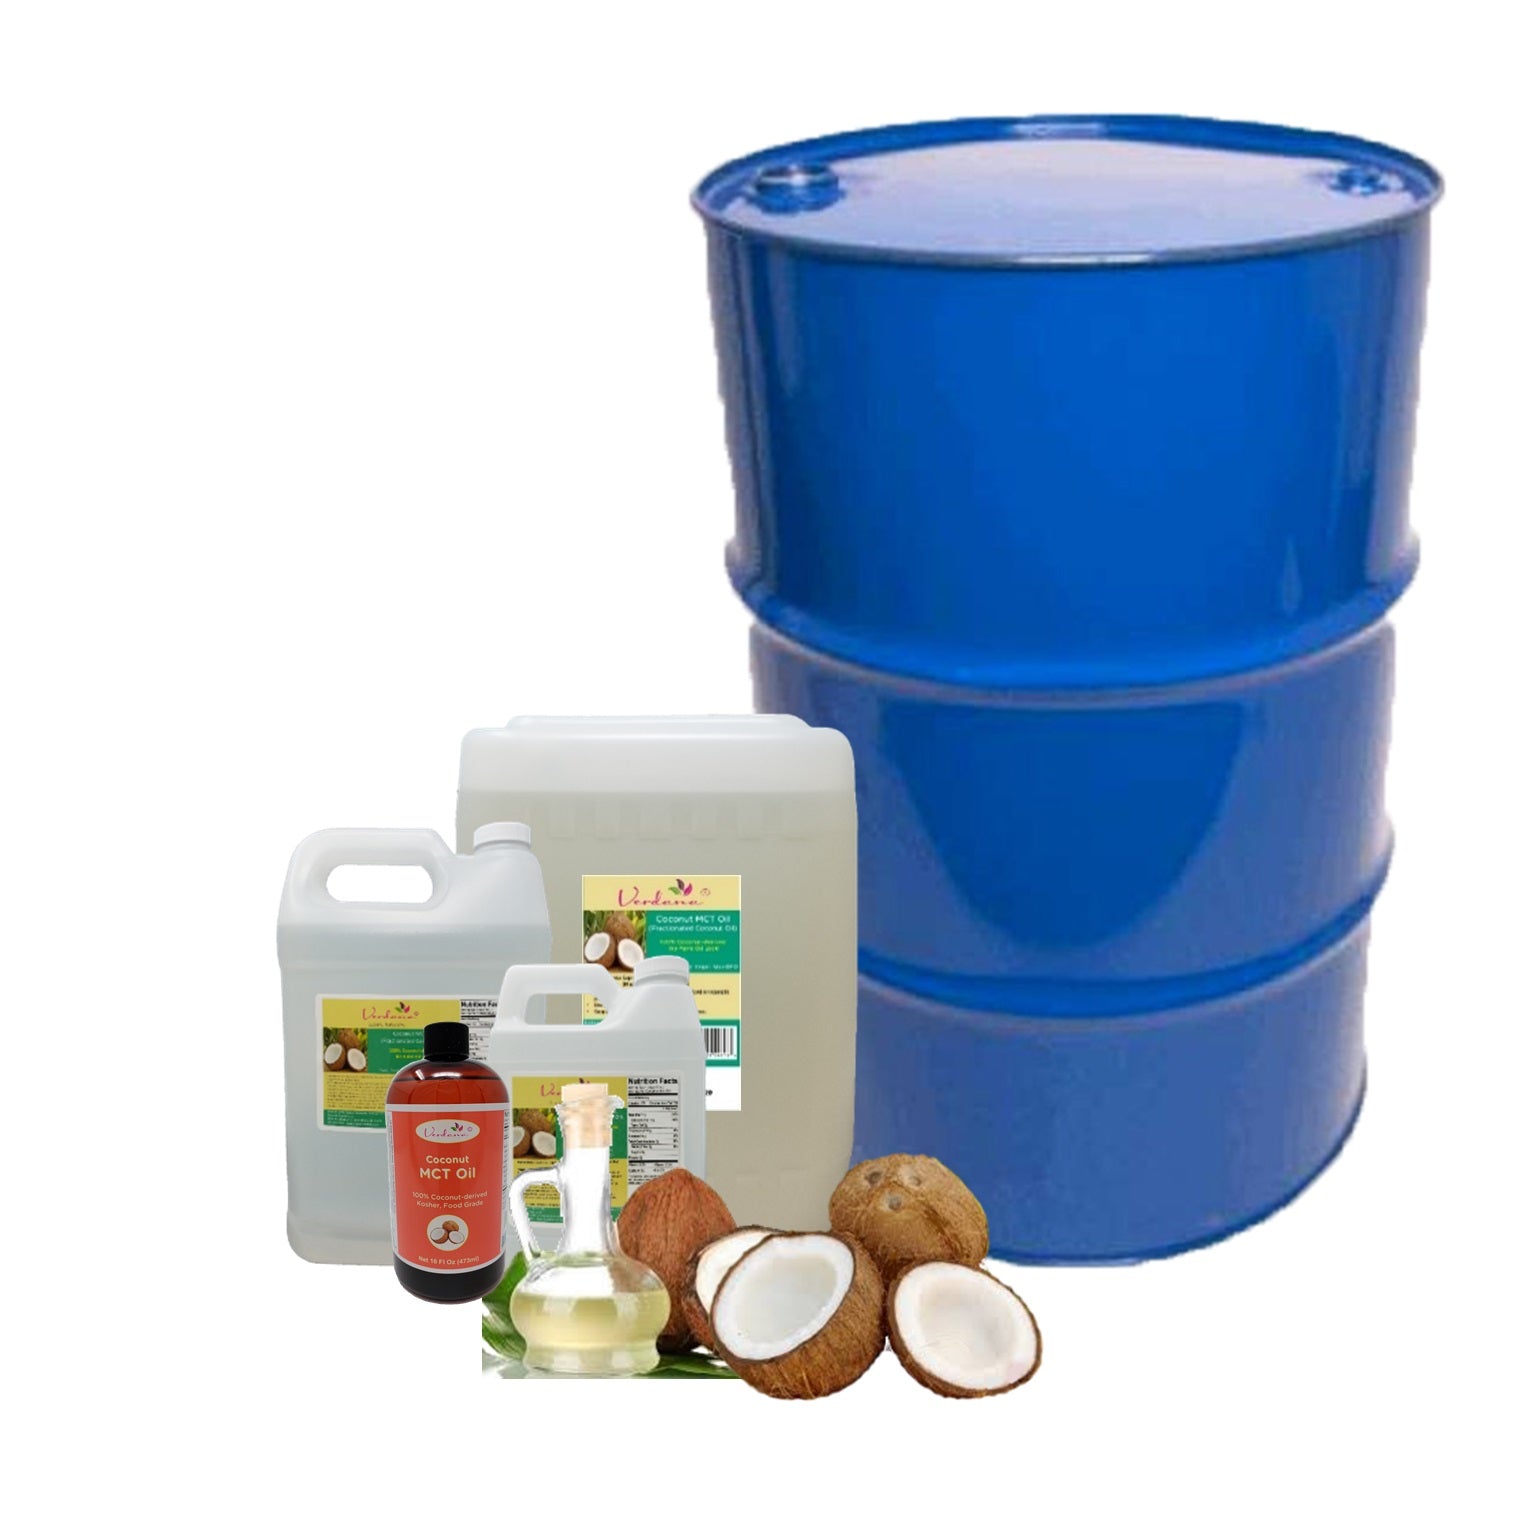 MCT Oil Bulk Wholesale - Organic Coconut MCT, Regular Coconut MCT and Palm MCT - Fractionated